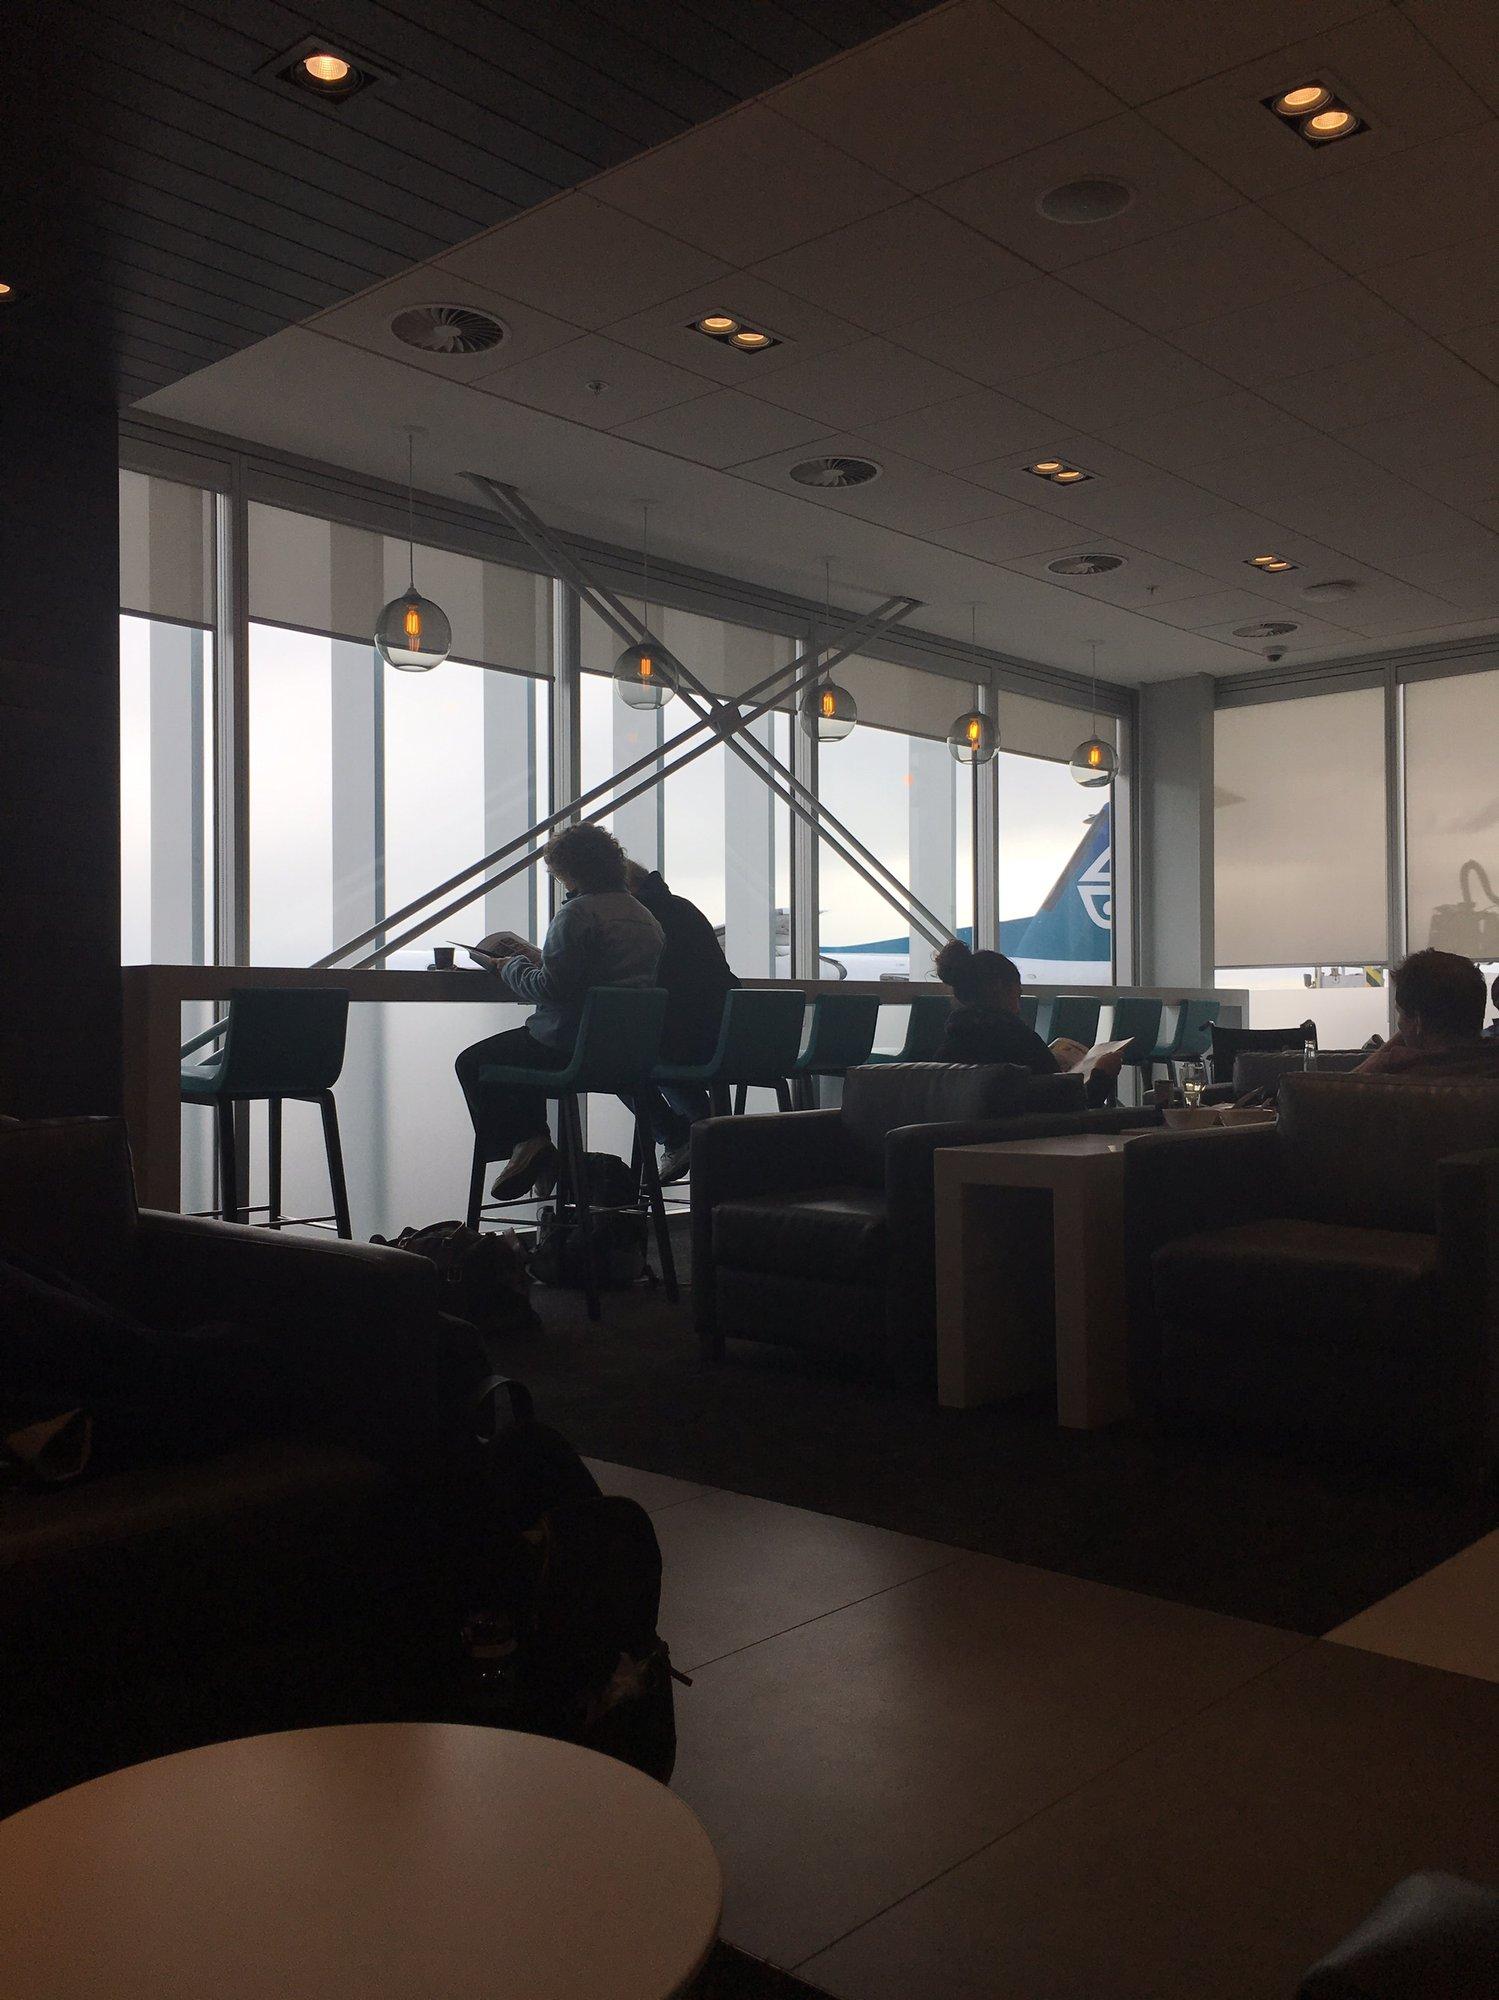 Air New Zealand Regional Lounge image 2 of 2